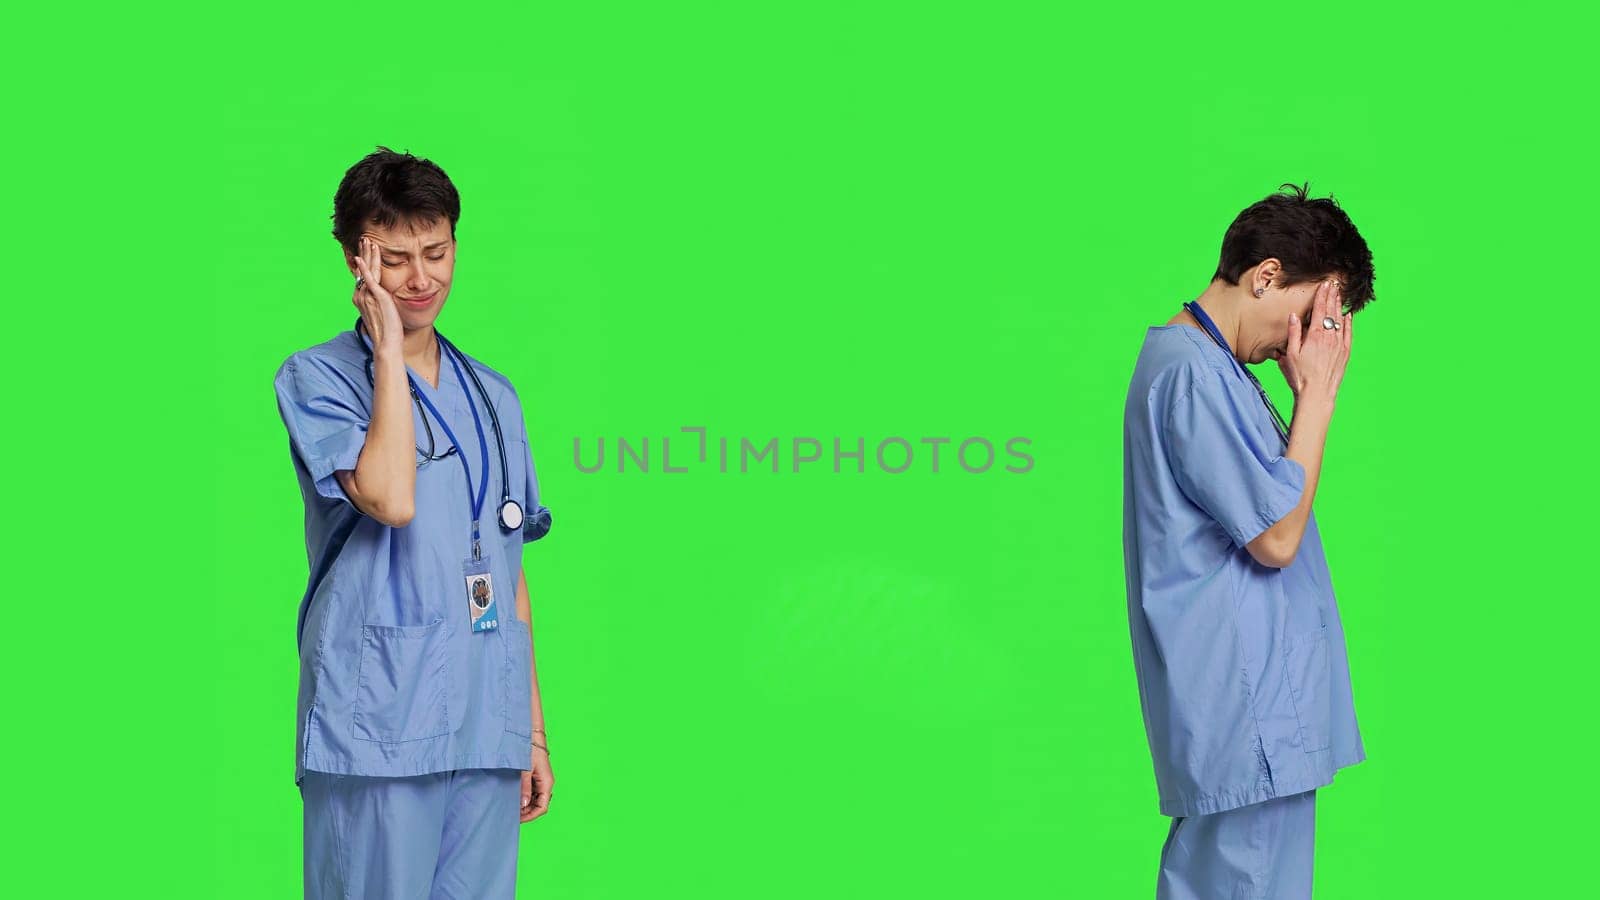 Unwell nurse suffering from a headache against greenscreen backdrop, wearing scrubs and feeling overworked at hospital. Medical assistant having a painful migraine, stress and burnout. Camera B.